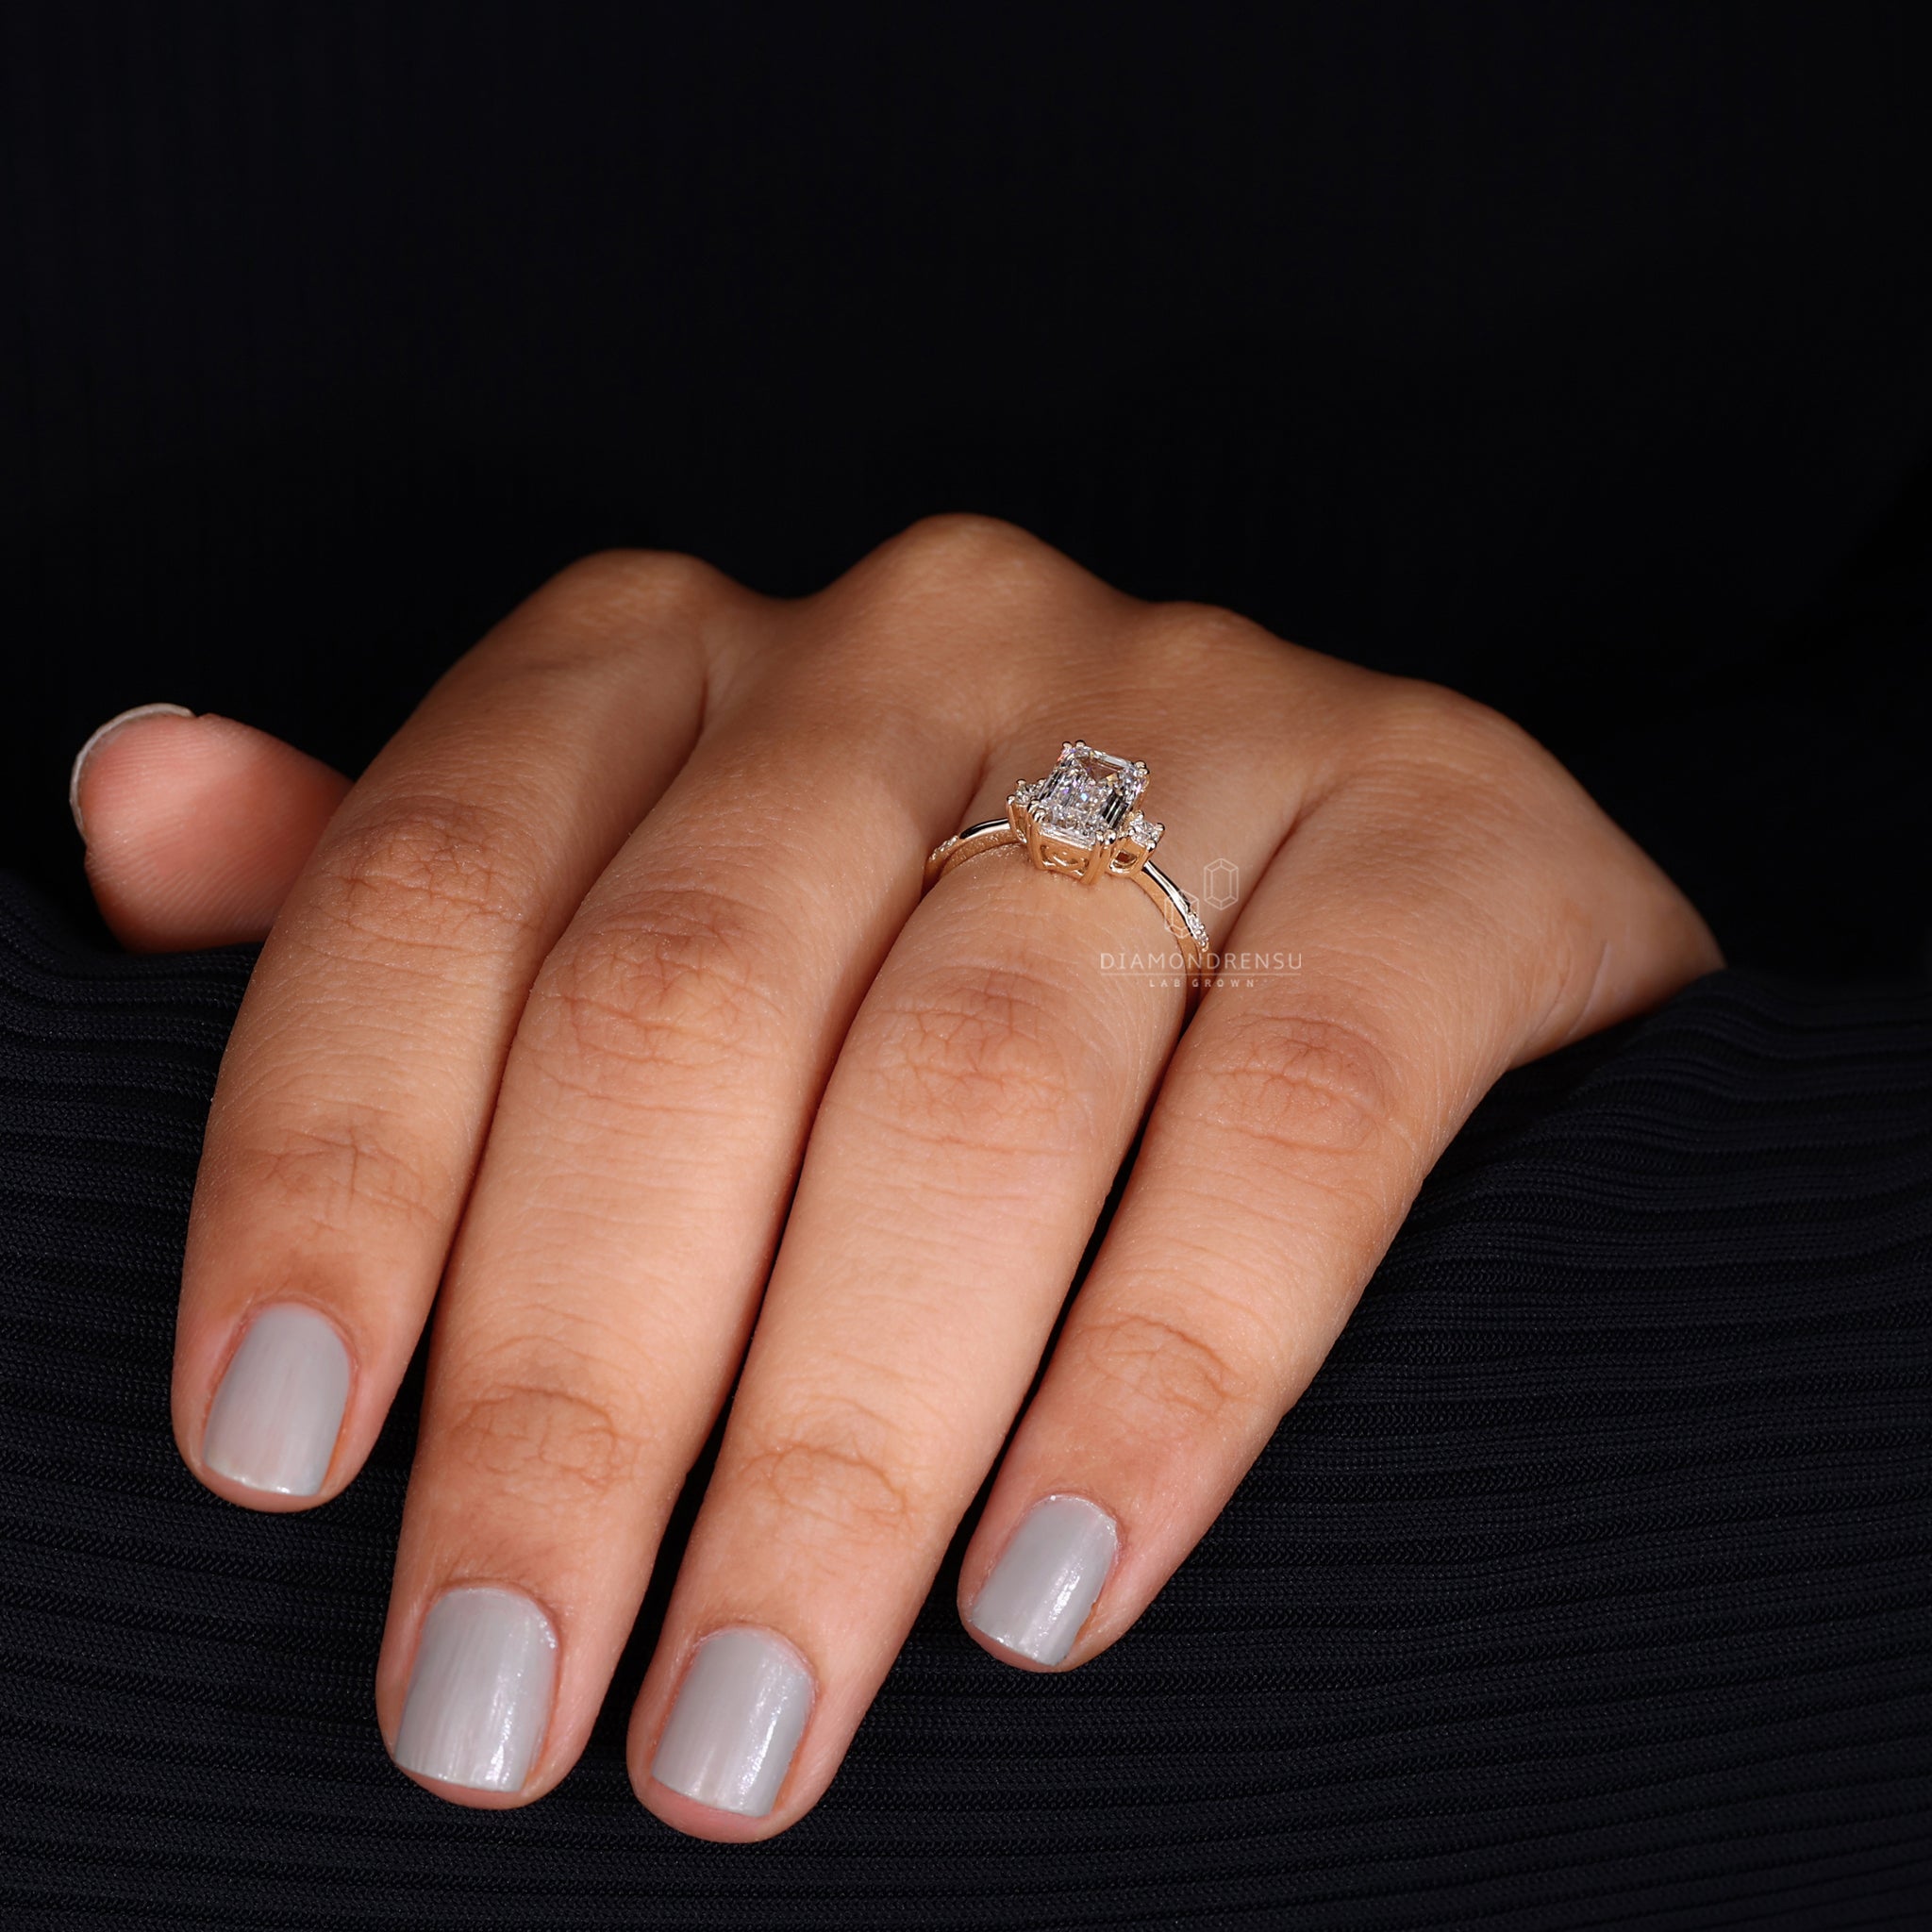 Model's hand gesturing with an emerald cut ring, emphasizing the stone's size and cut